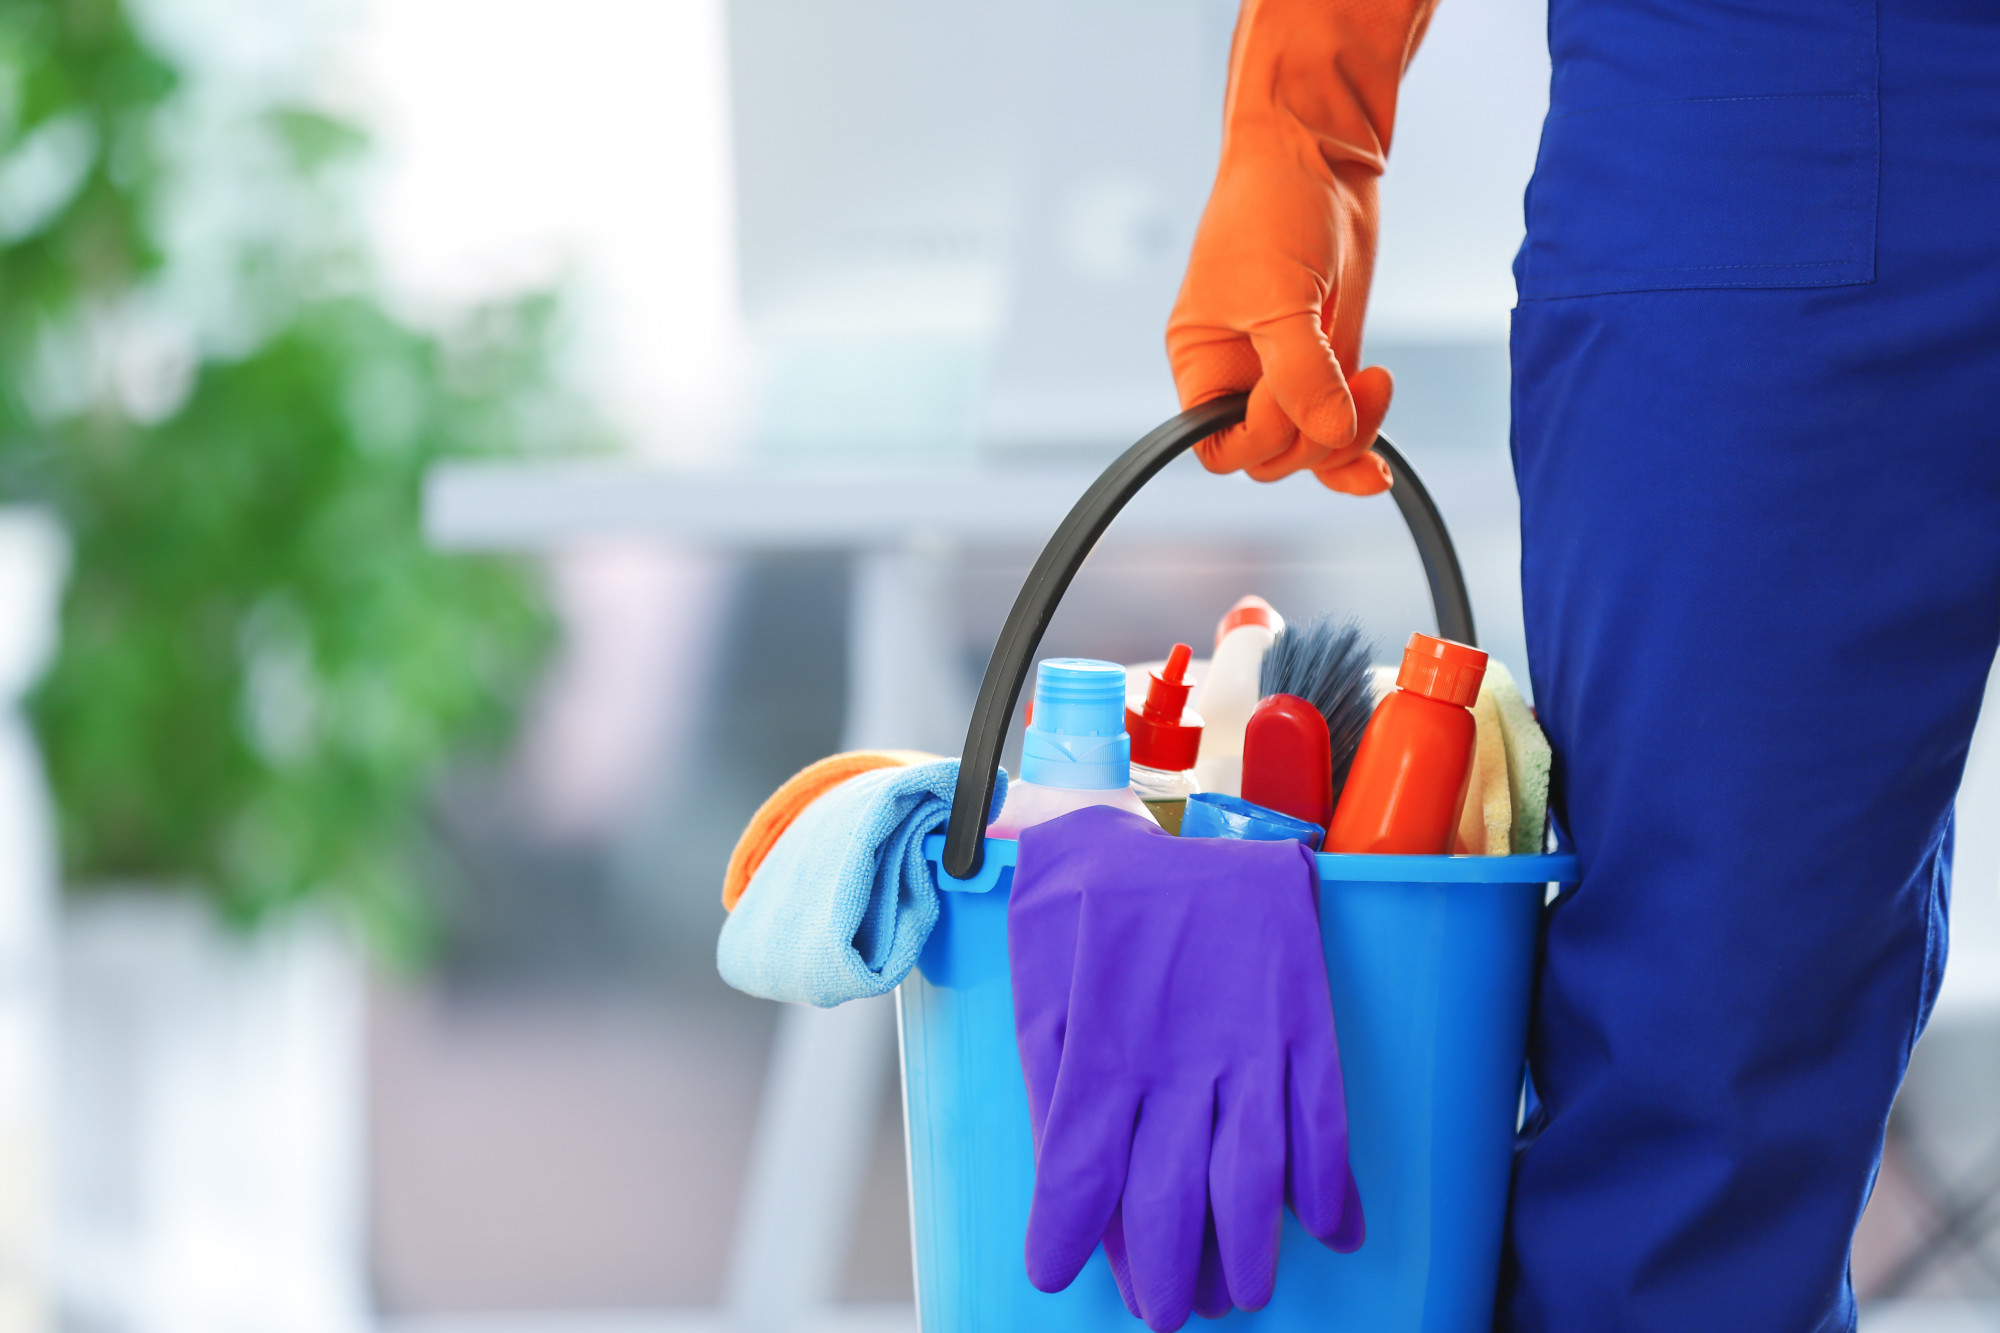 Affordable House Cleaning Services in Phoenix: Quality vs. Cost